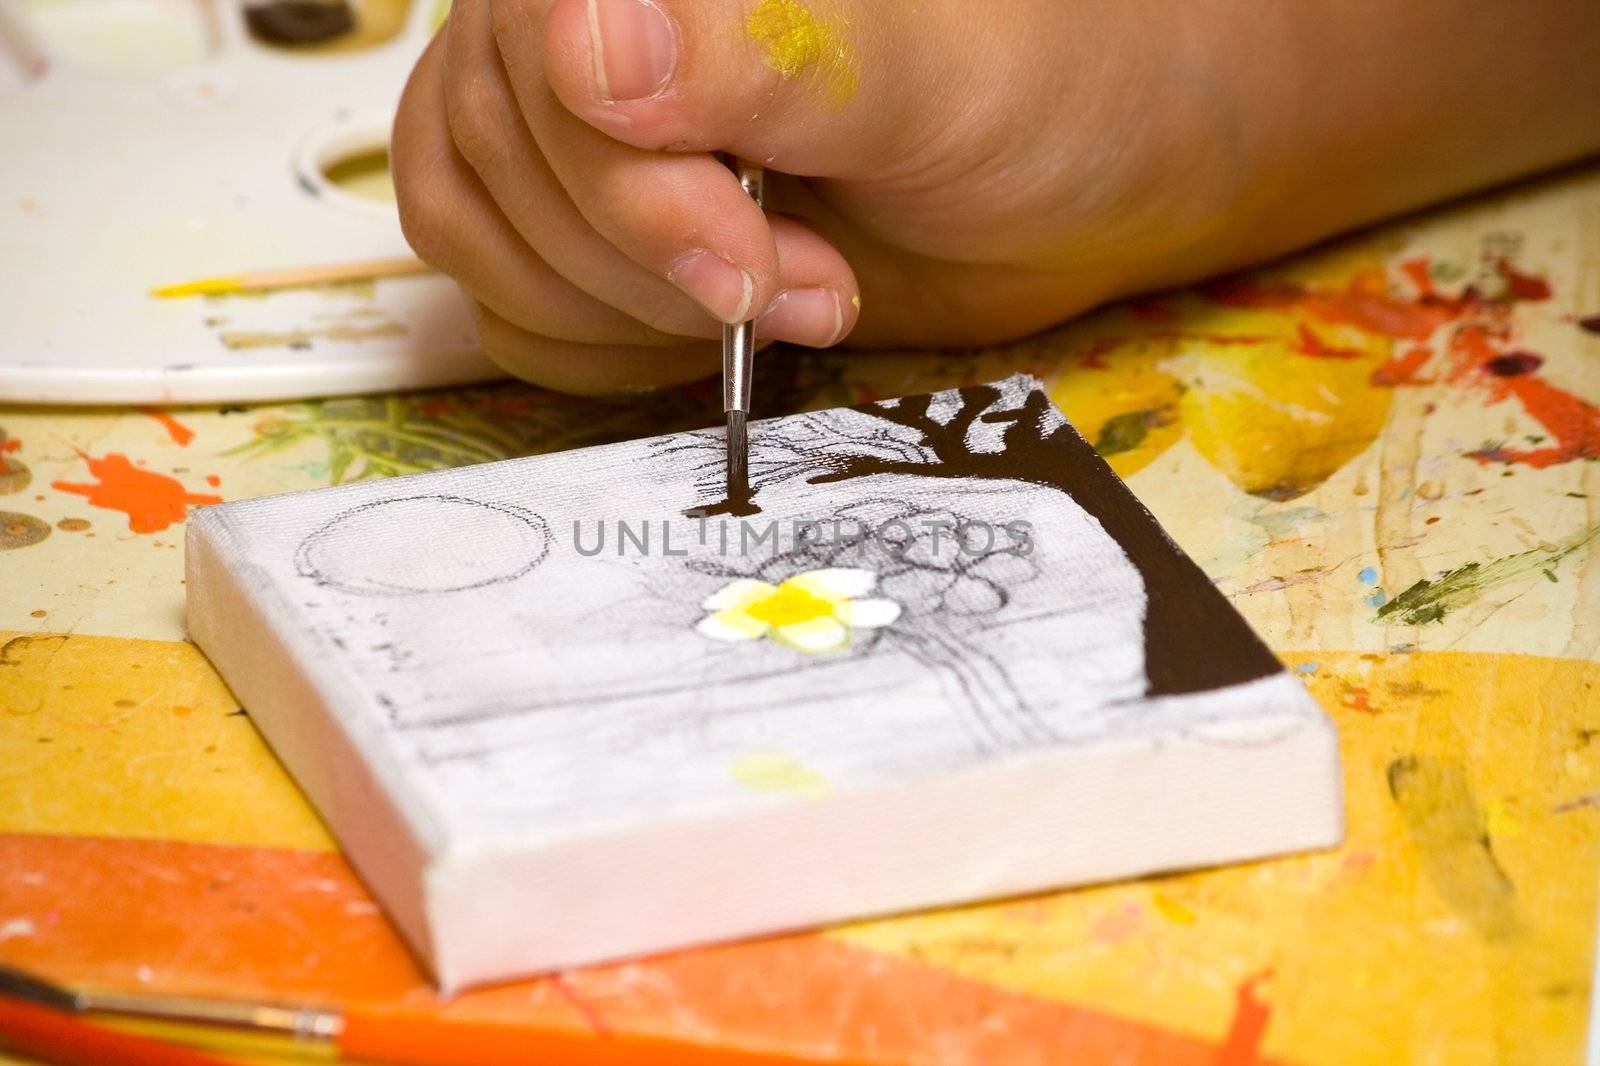 Hands of the young artist of the miniature painter drawing a picture.Work of the artist.